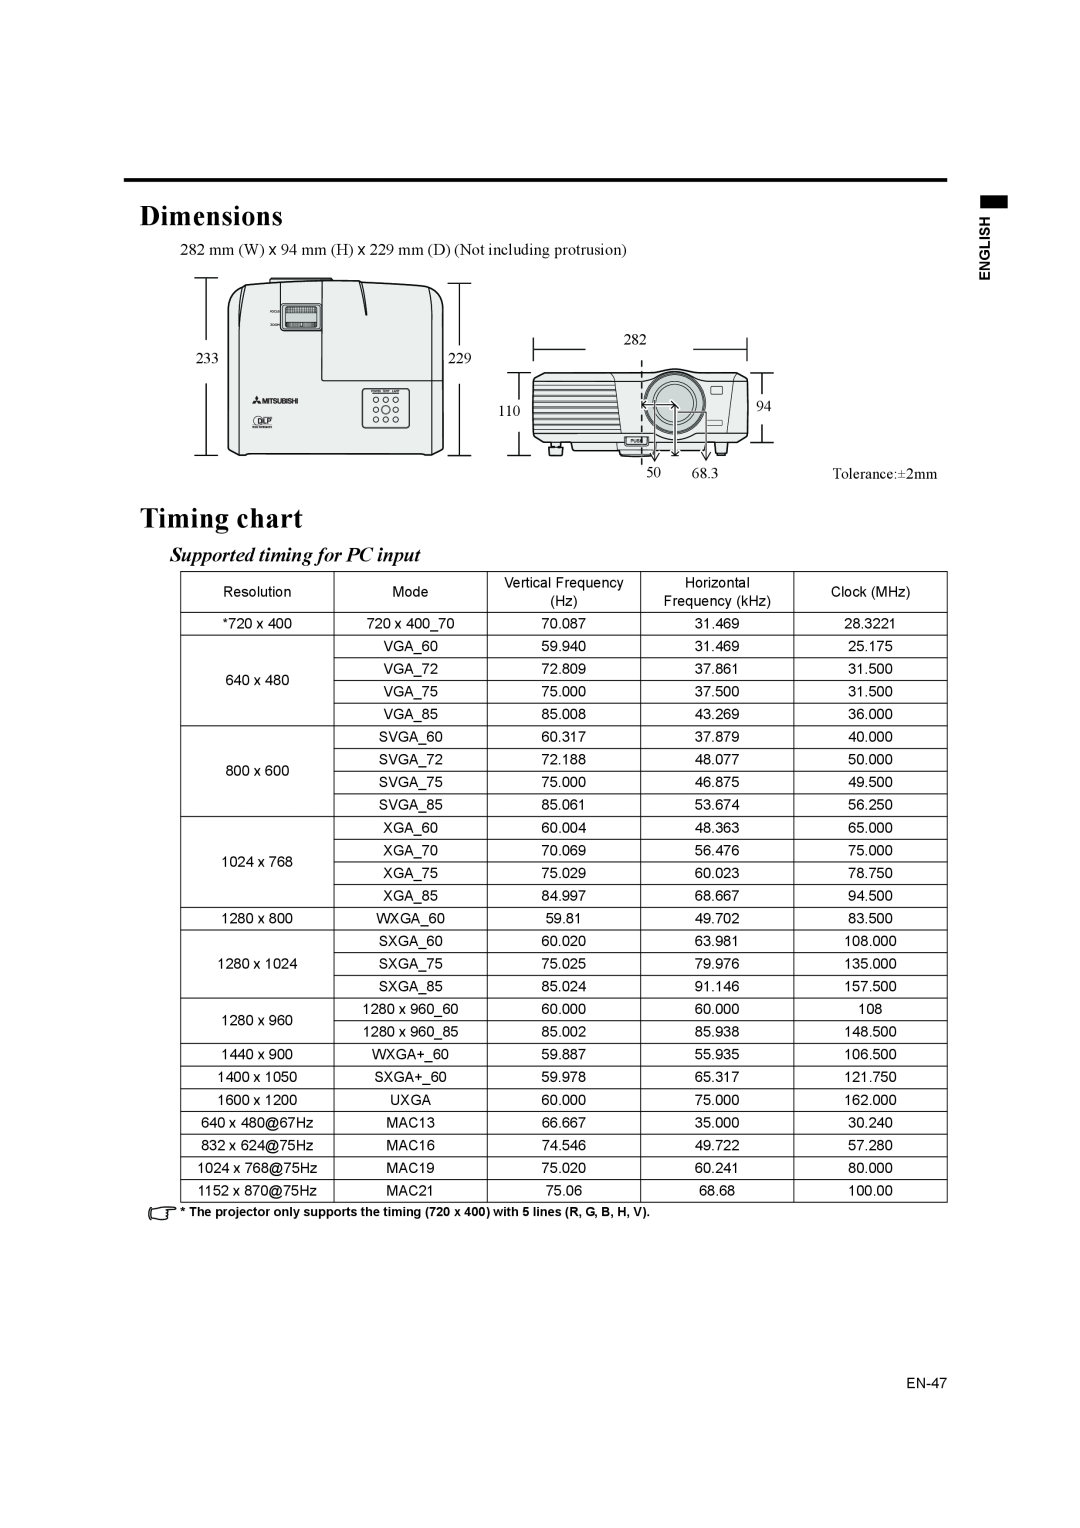 Mitsubishi Electronics ES200U, EX200U user manual Dimensions, Timing chart, Supported timing for PC input 